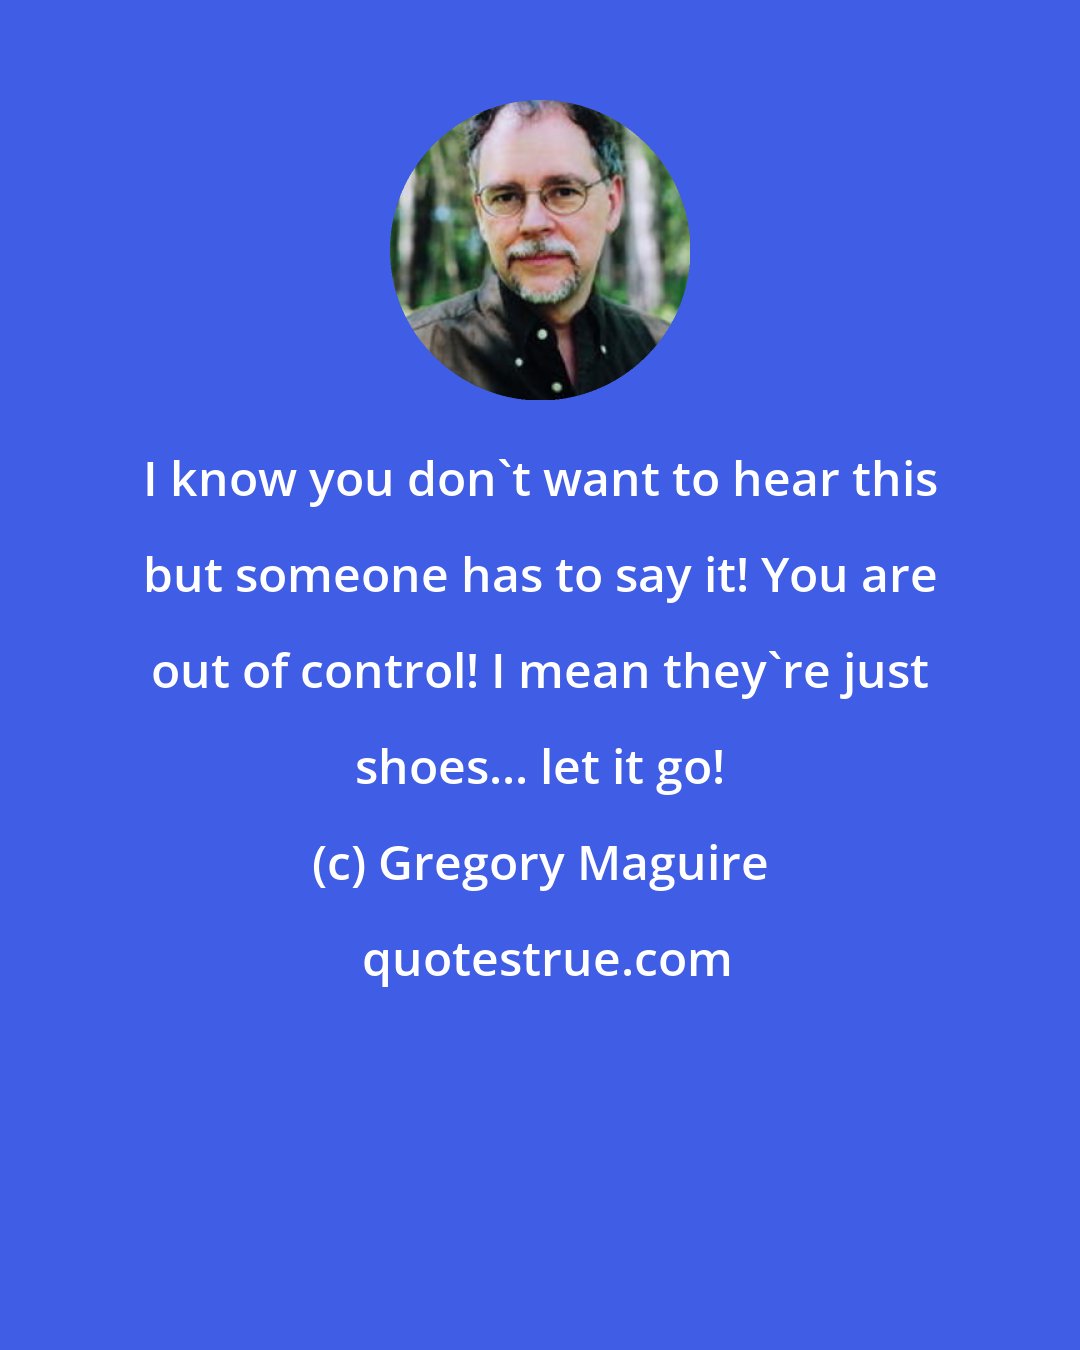 Gregory Maguire: I know you don't want to hear this but someone has to say it! You are out of control! I mean they're just shoes... let it go!